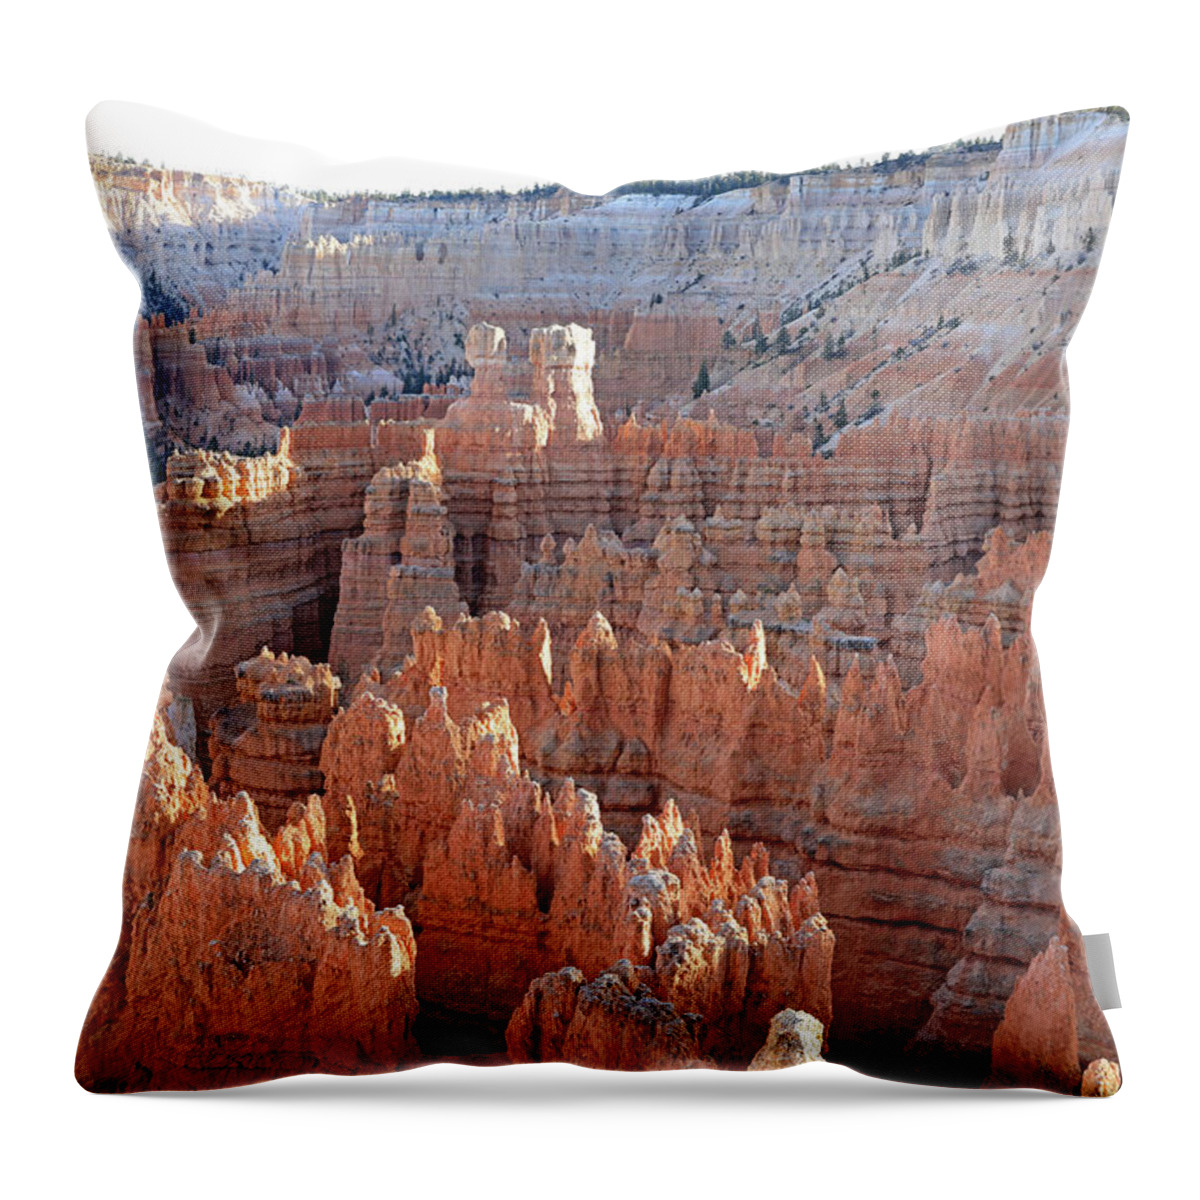  Throw Pillow featuring the photograph Bryce Canyon National Park - Sunset Point #2 by Richard Krebs